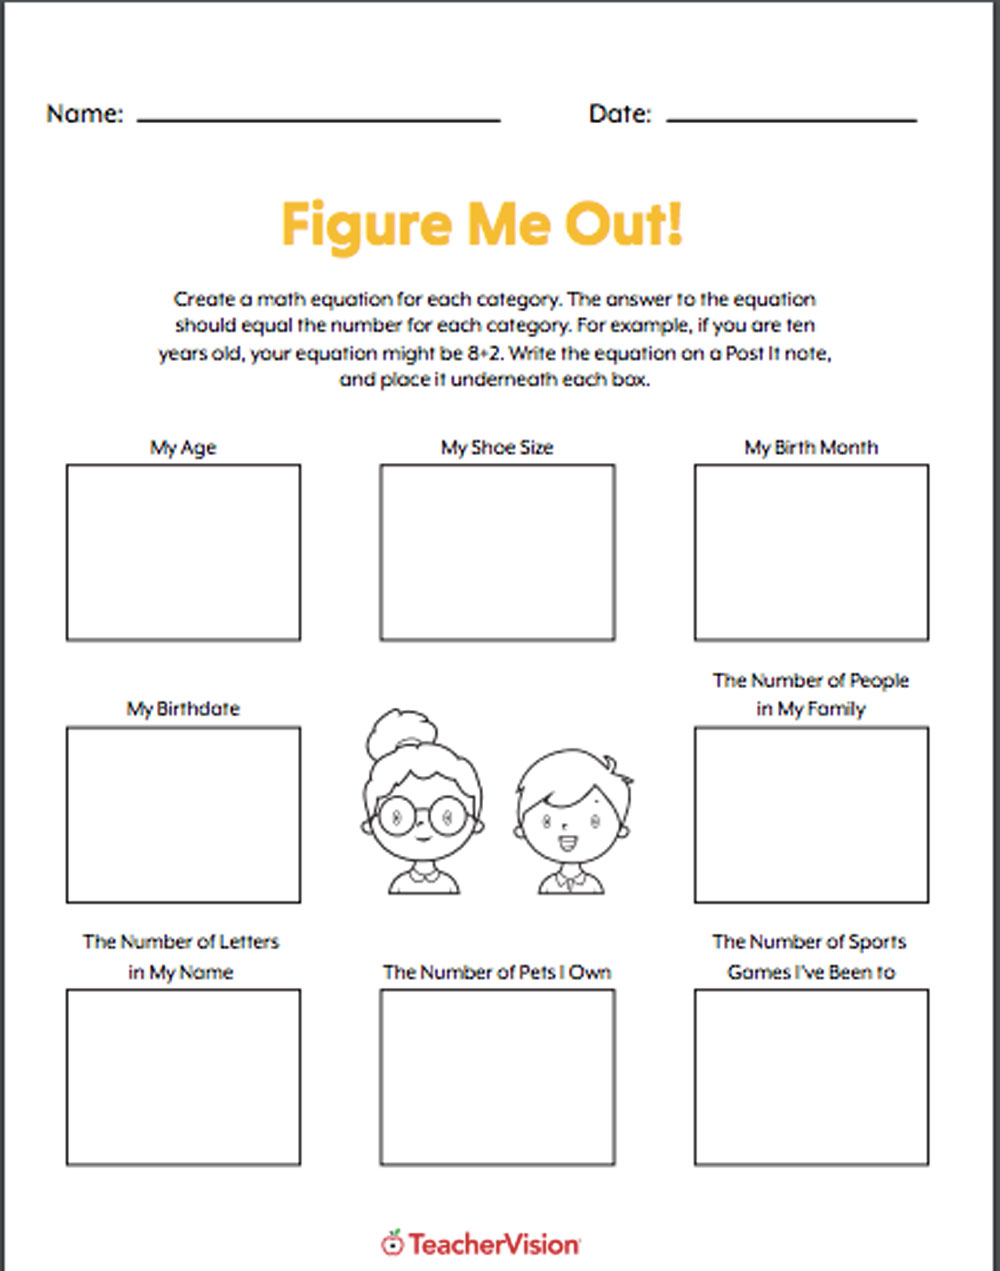 toys-all-about-me-math-figure-me-out-math-printable-activity-learning